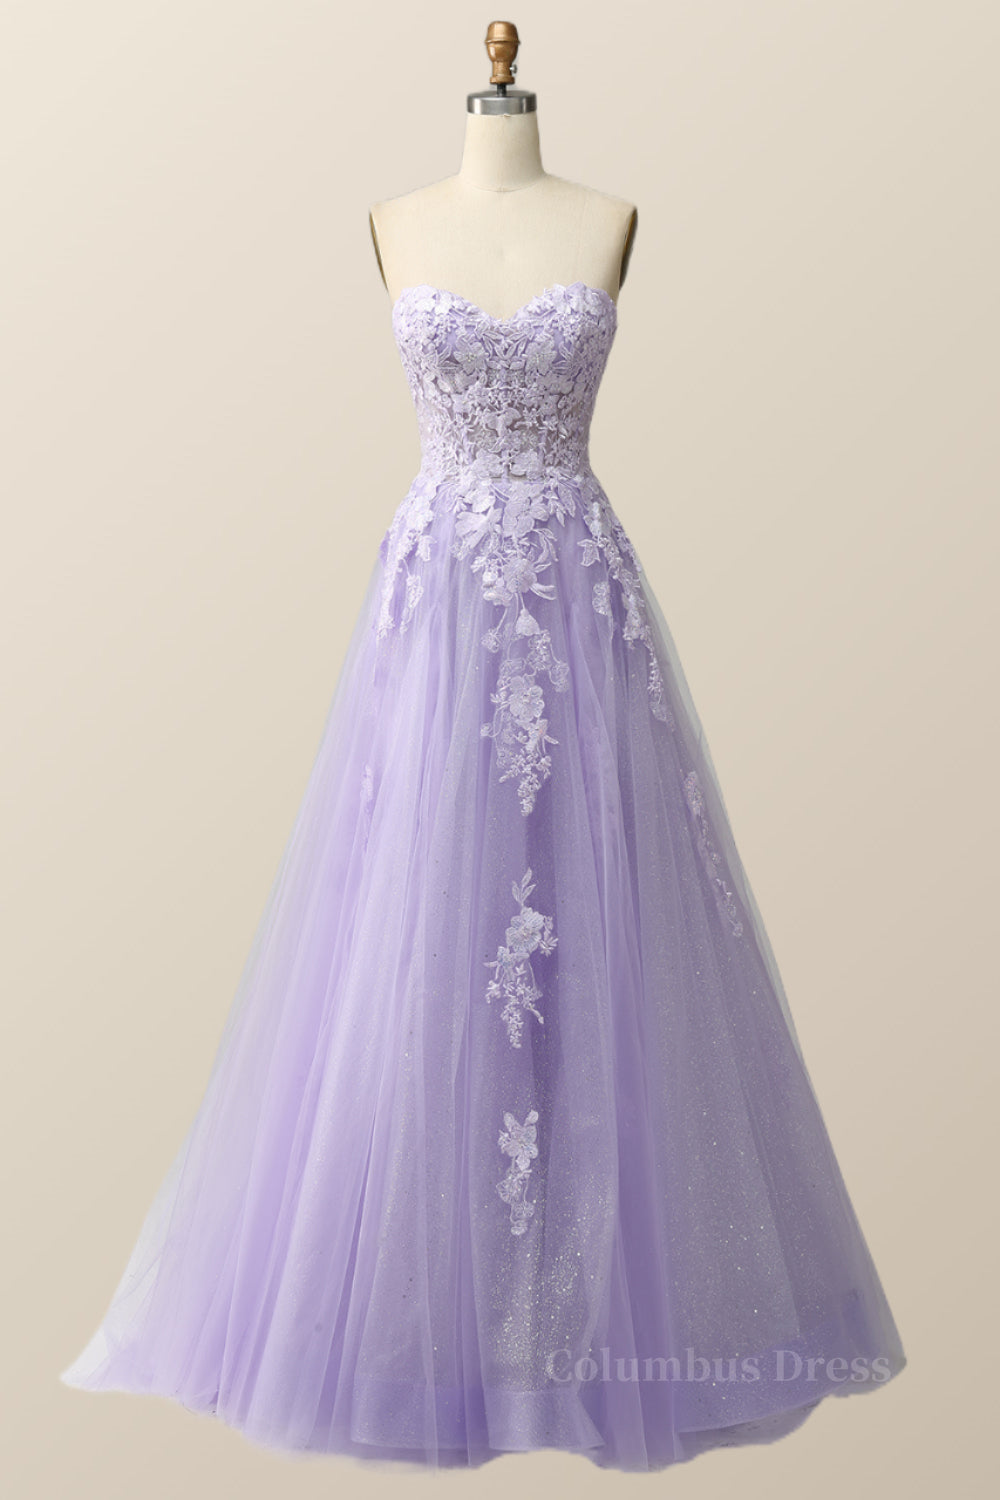 Homecoming Dress Pretty, Strapless Lavender and White Floral Embroidered Formal Dress